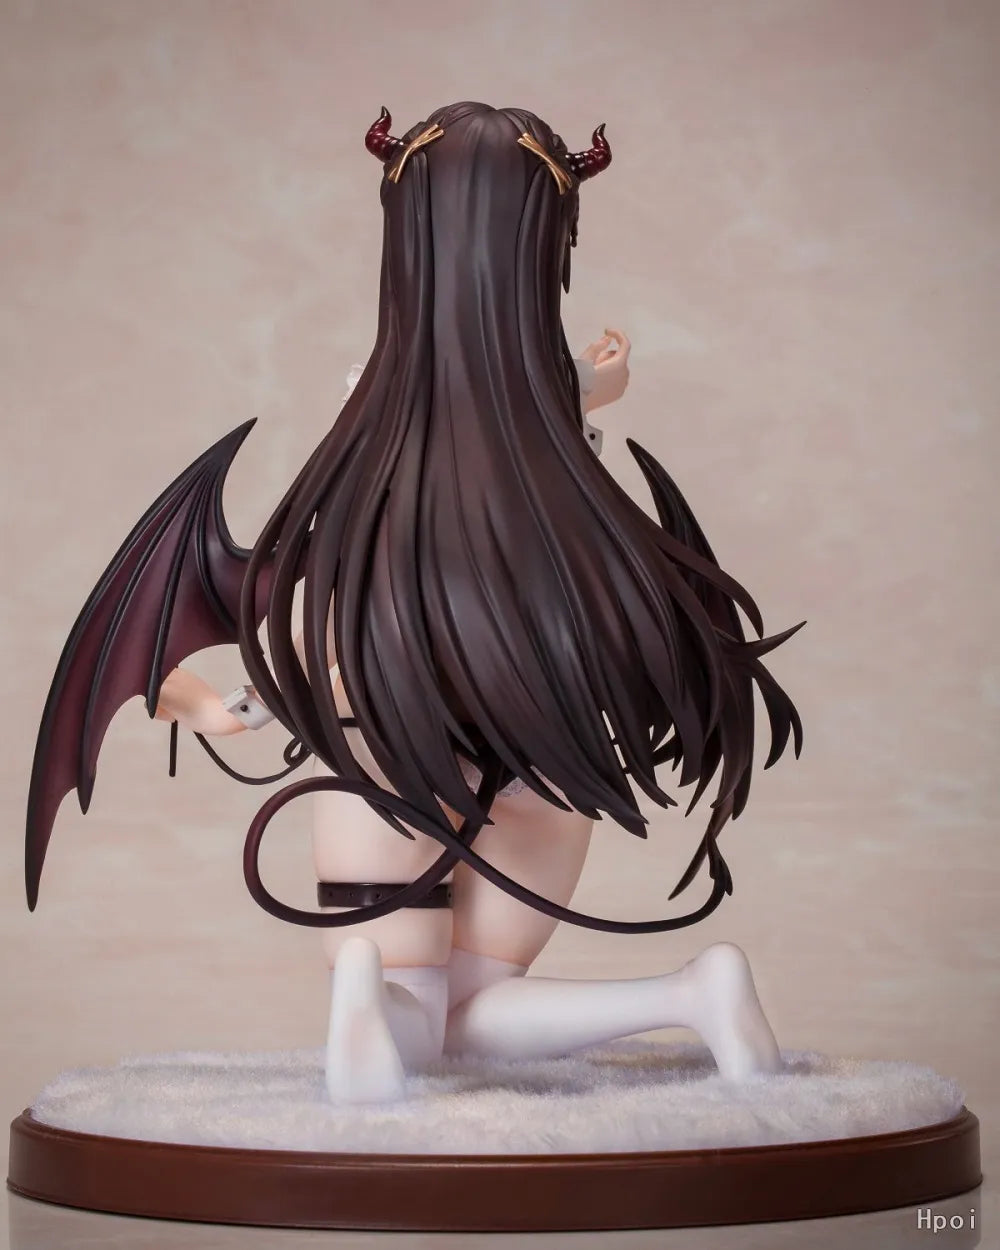 New Japanese Anime Sexy Girl Figure 1/6 Charm AIKO Taya Demon Maid PVC Action Figure Toy Statue Adult Collection Model Doll Gift